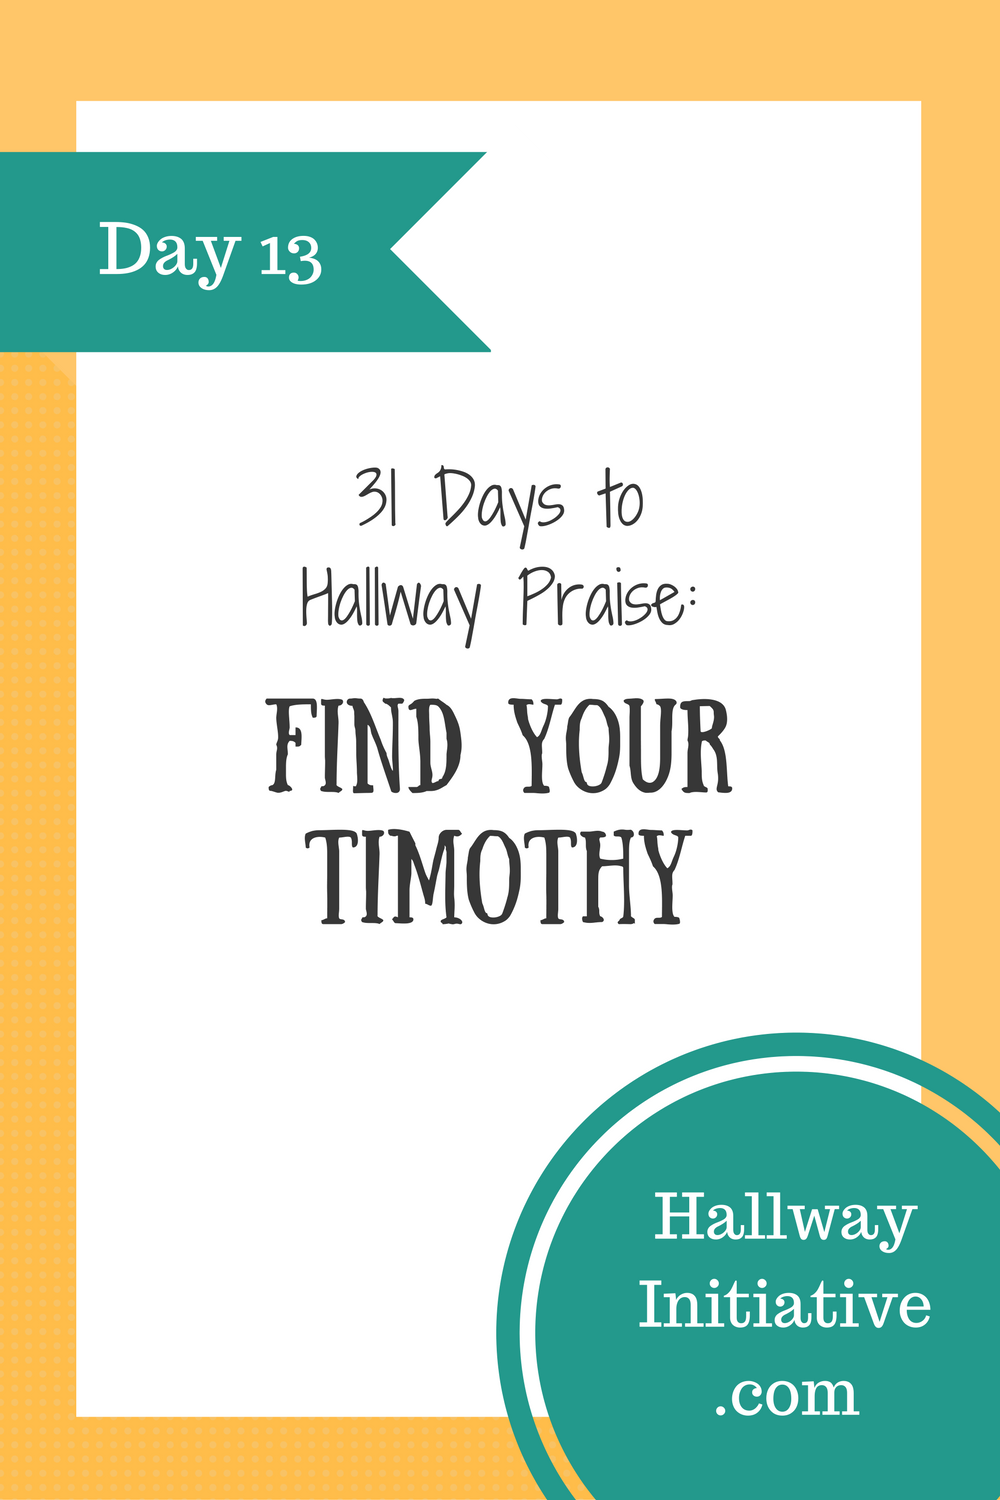 Day 13: find your Timothy